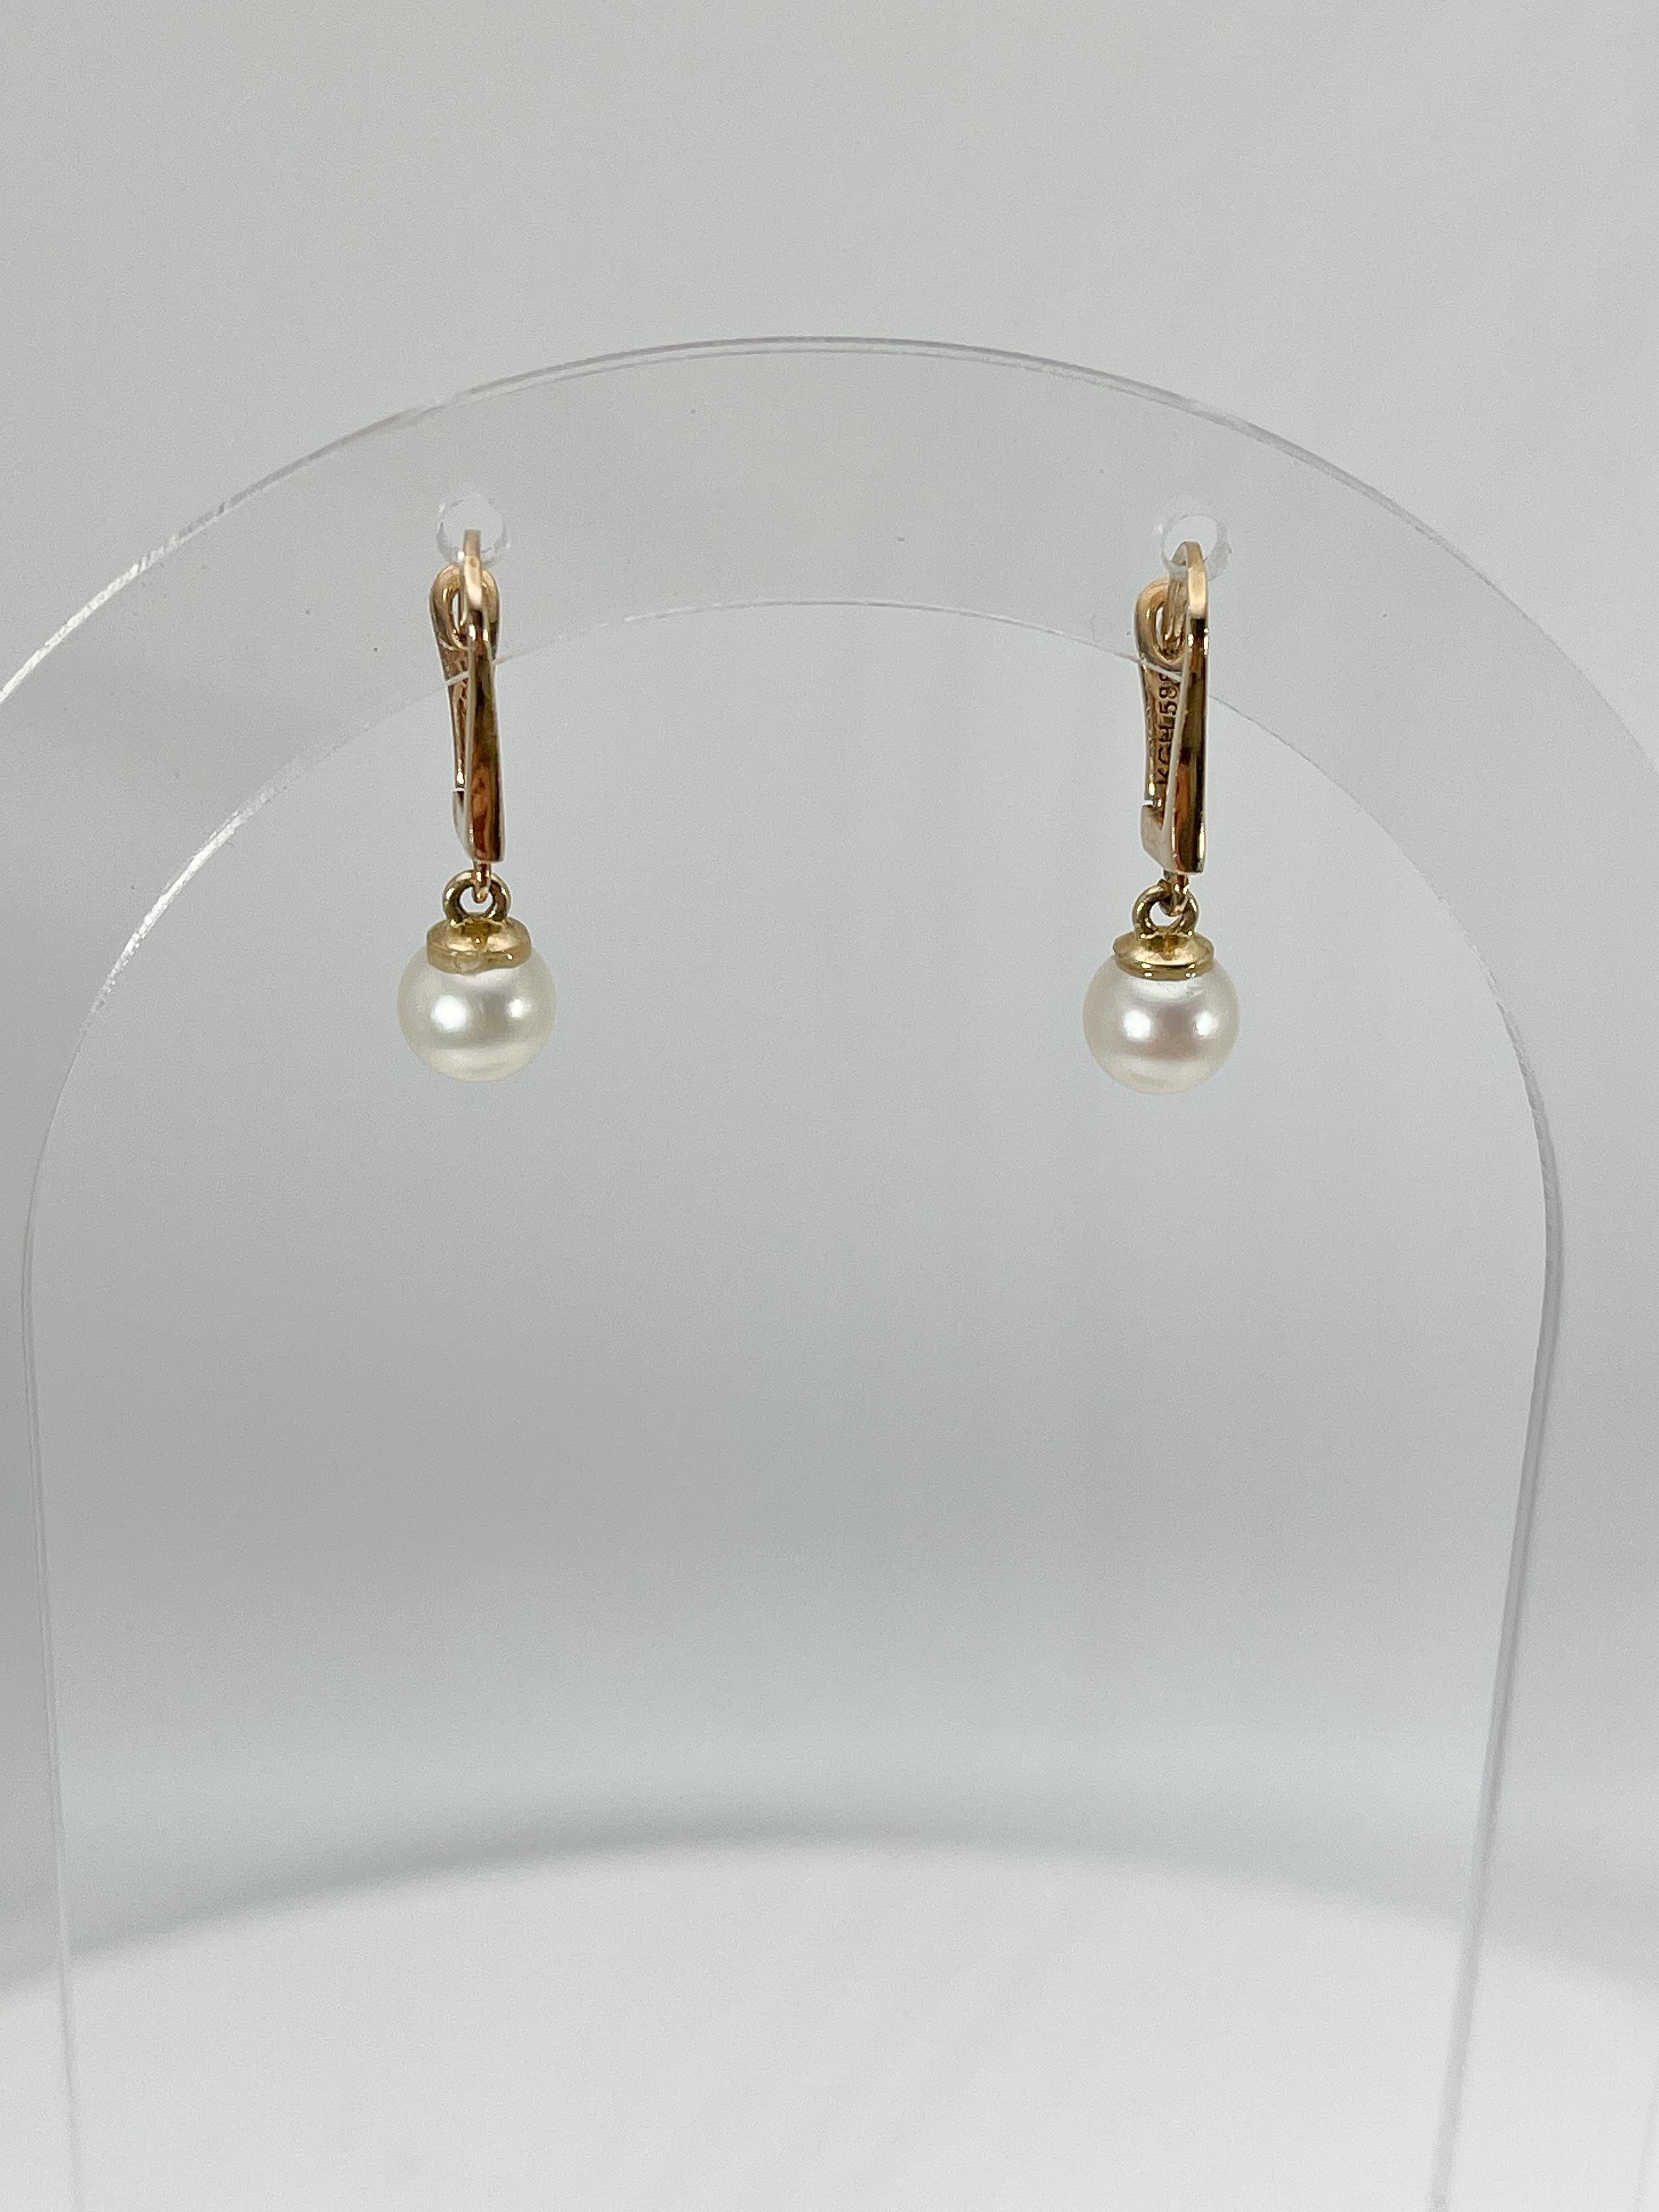 14k yellow gold white pearl drop earrings. The length of these earrings measure 20.5, and the diameter of the pearl is 6mm, and they have a total weight of 2.06 grams.